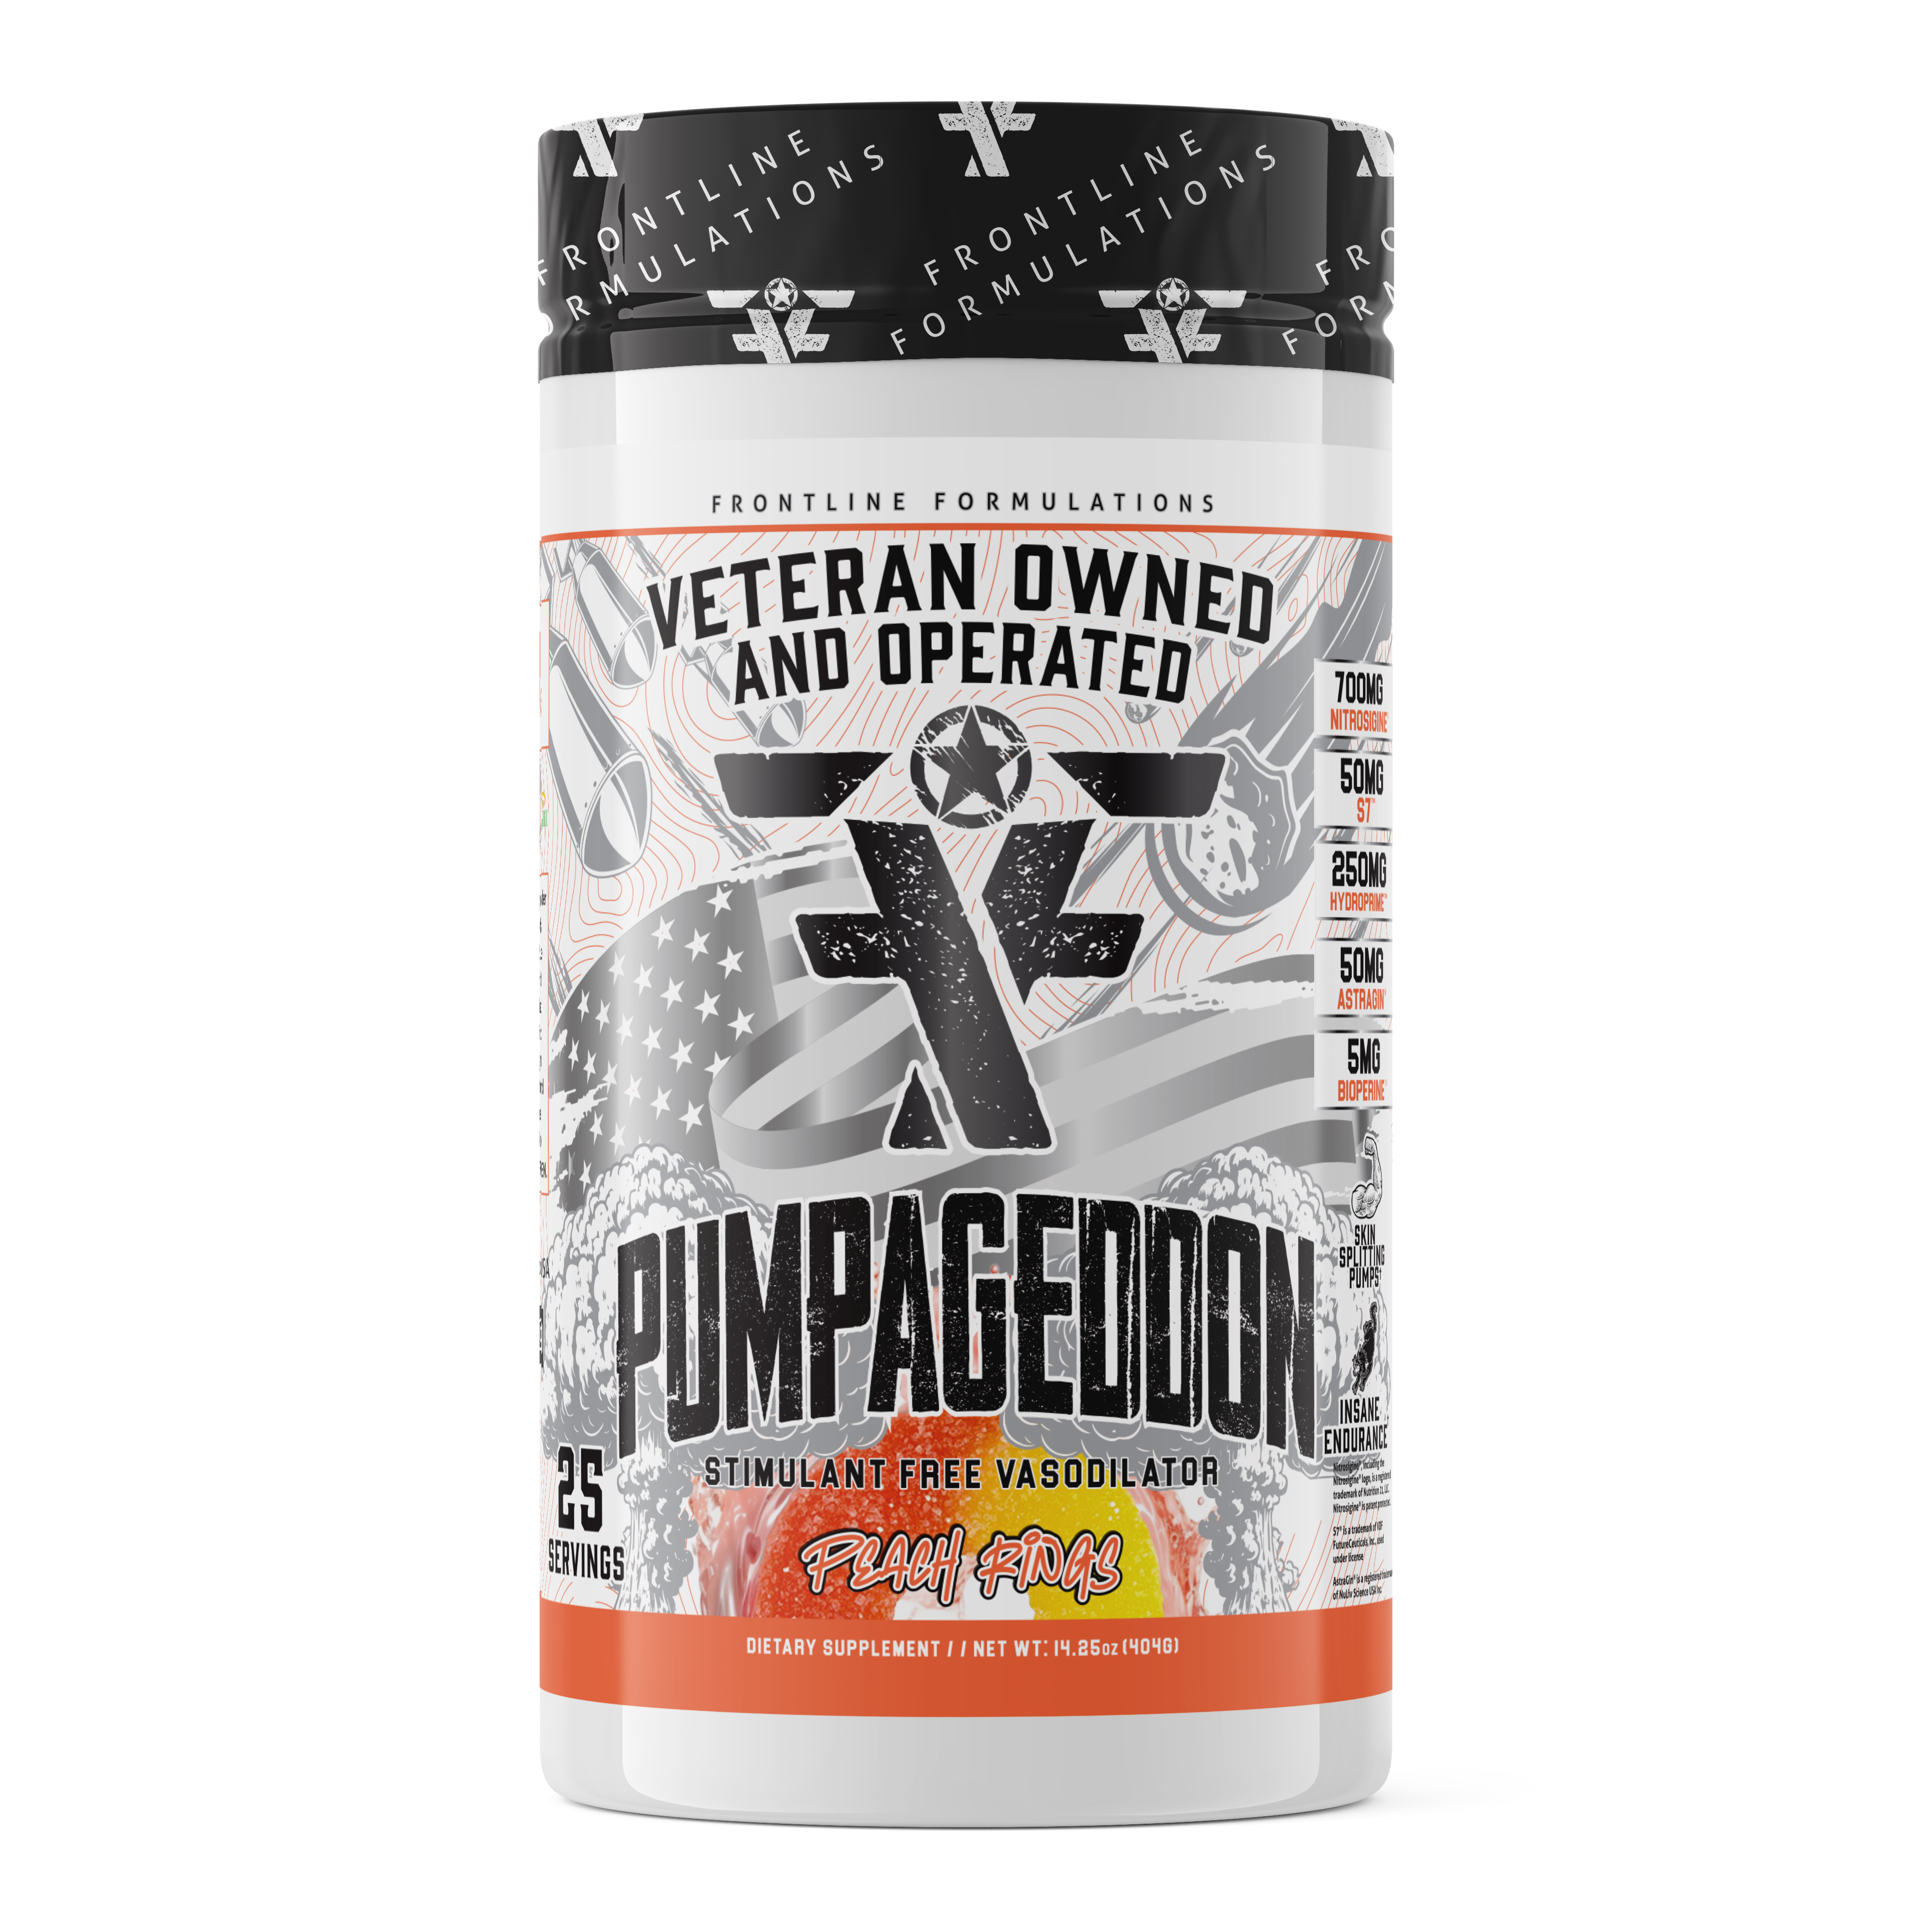 Pumpageddon Strap in! This concoction is for people who chase only the most ridiculous pumps! With a jaw-dropping 7,000mg of L-Citruline Malate and key ingredients like nitrosigine, beta alanine, and S7, this caffeine-free pre-workout will give you the sk